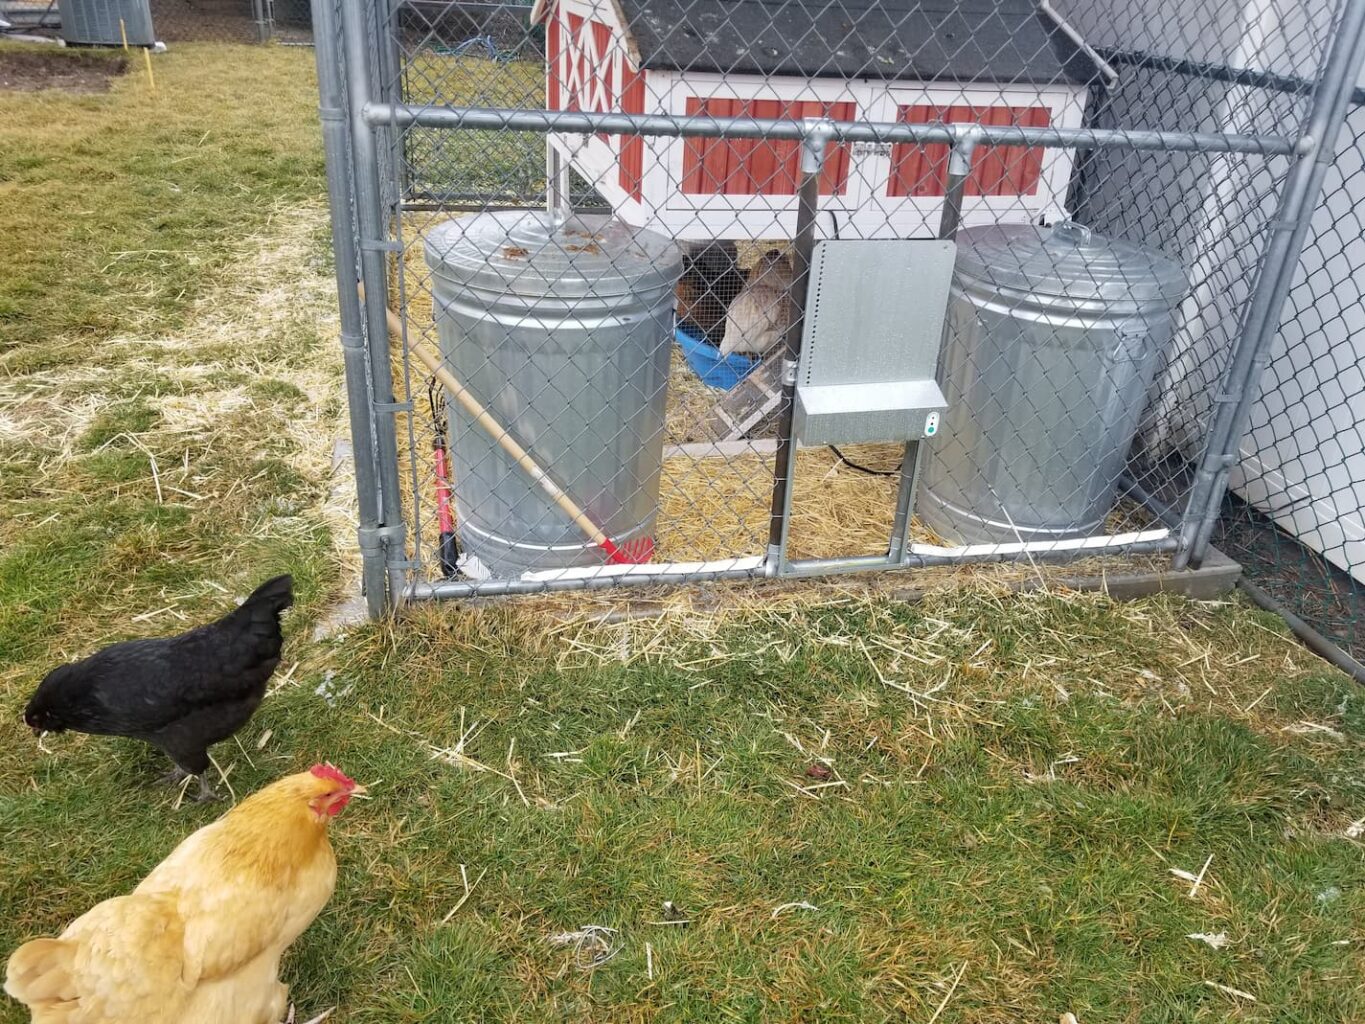 An image of chickens in front of an automatic chicken door in an outdoor run.